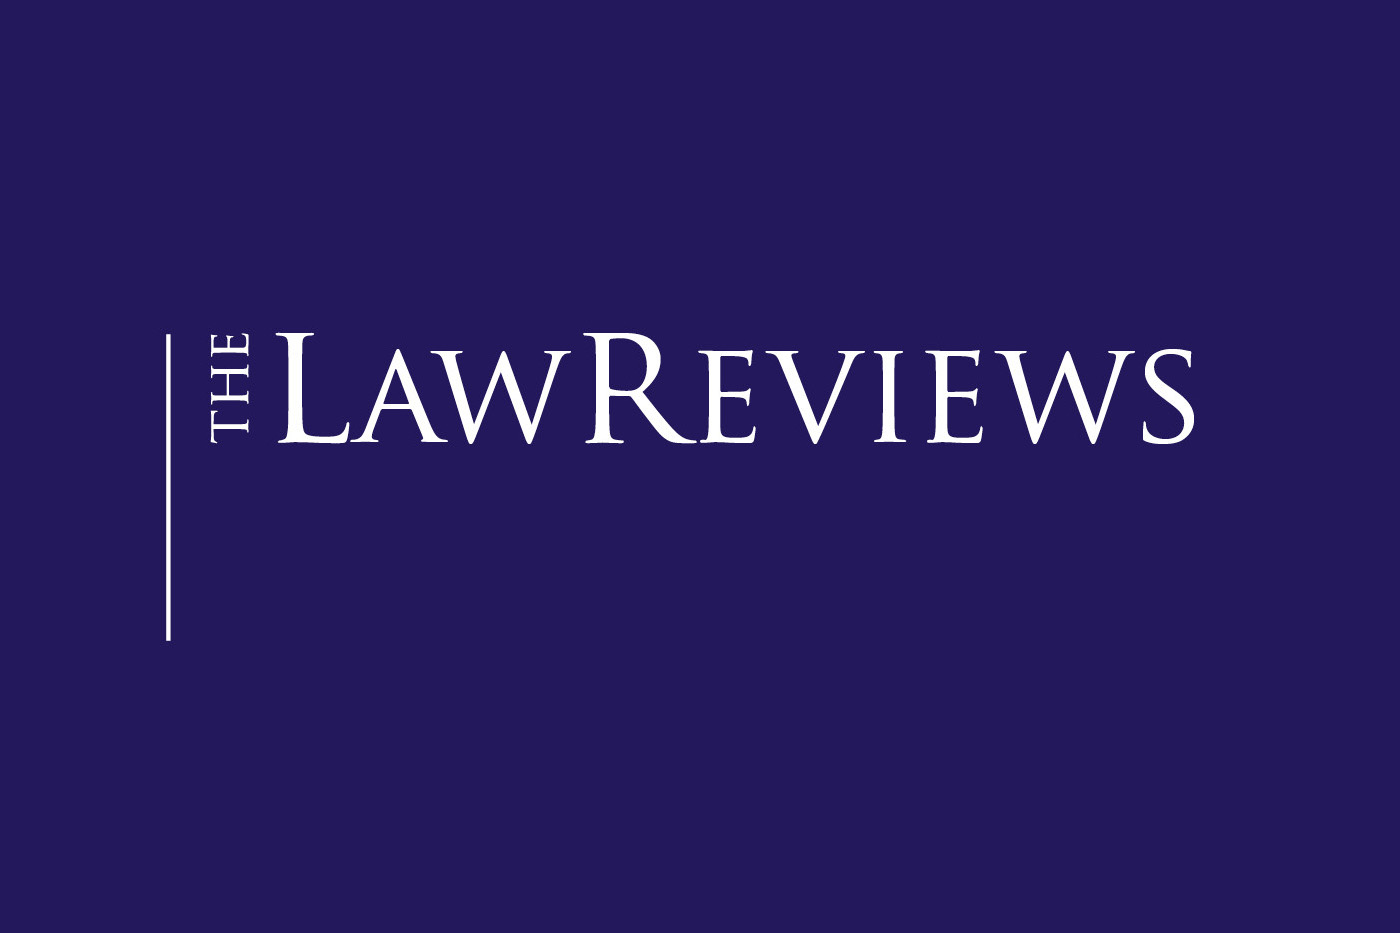 the law reviews logo